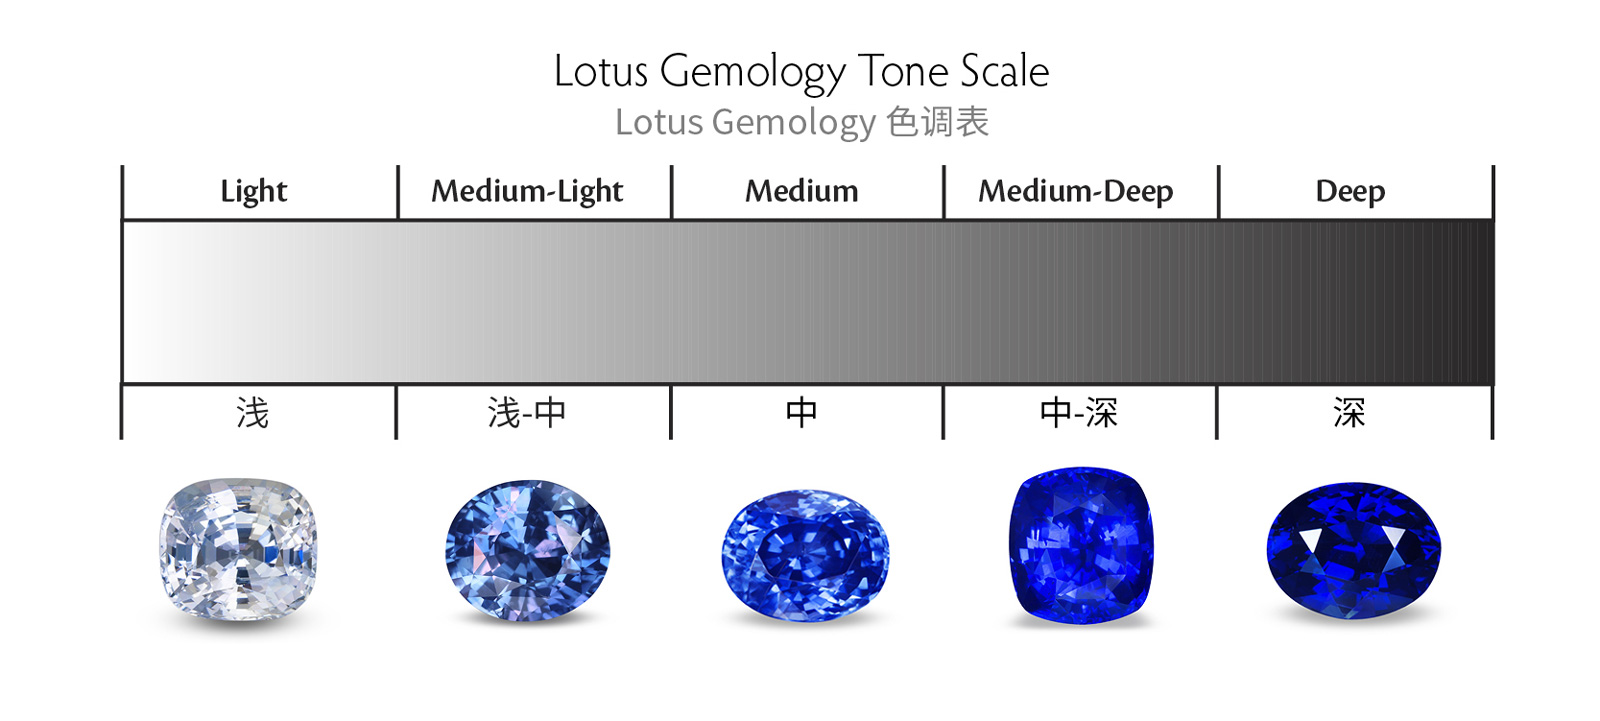 Lotus Gemology reports use a five-step tonal scale.